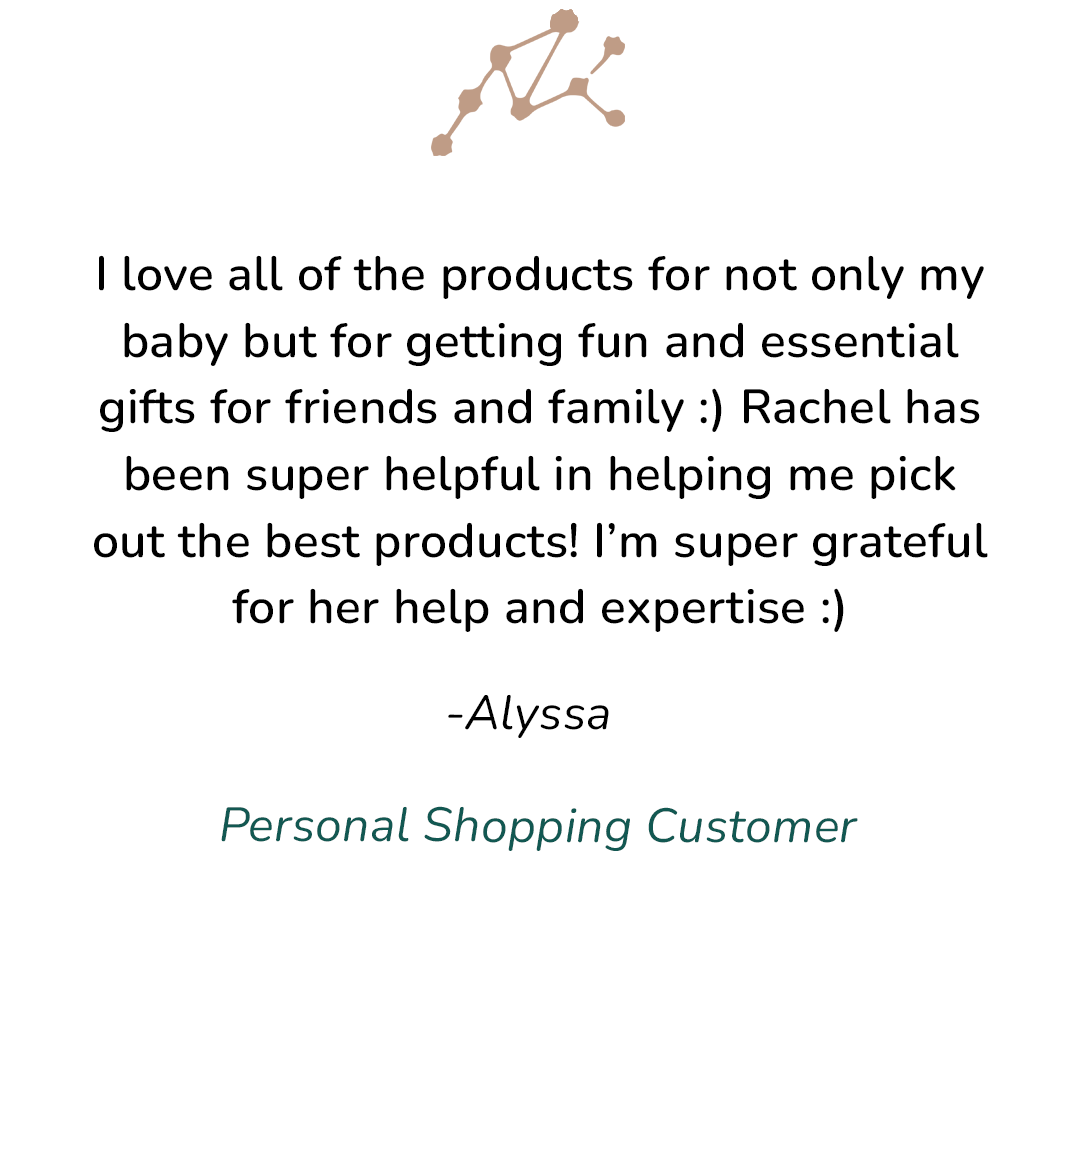 Personal Shopping Customer review: "I love all of the products for not only my baby but for getting fun and essential gift for friend & family :) Rachel has been super helpful in helping me pick out the best products! I'm super grateful for her help..." 